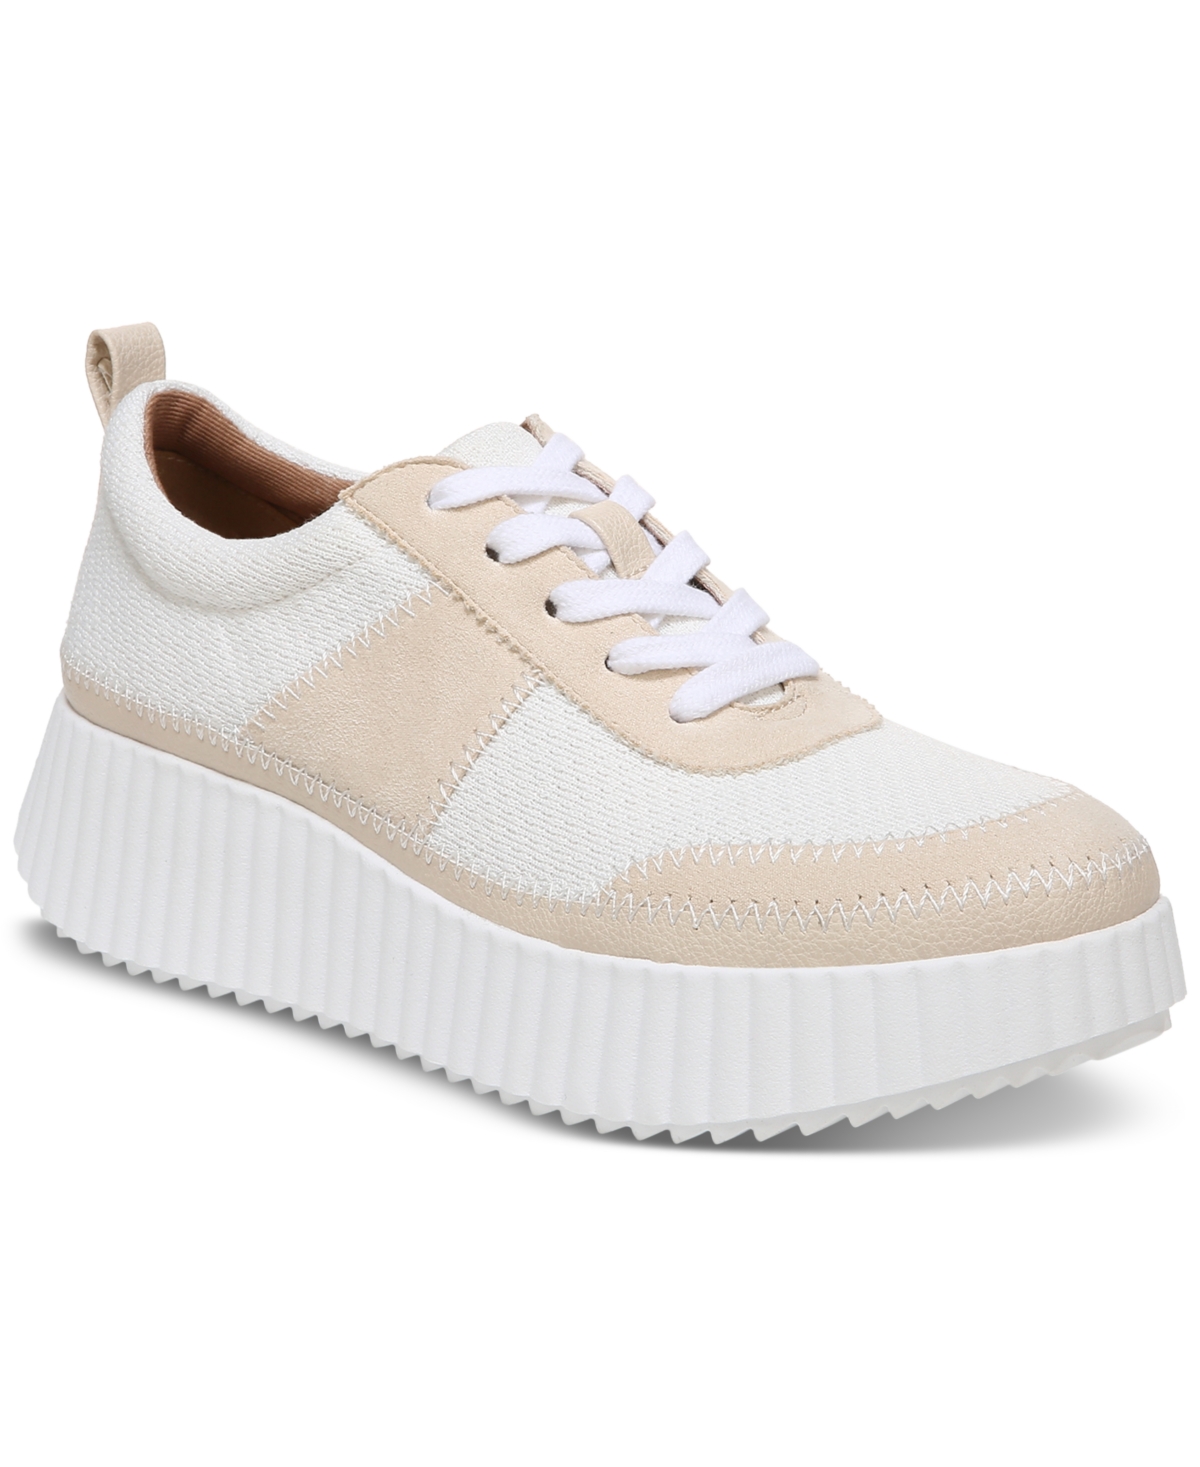 Women's Cooper Lace-Up Platform Sneakers - White Multi